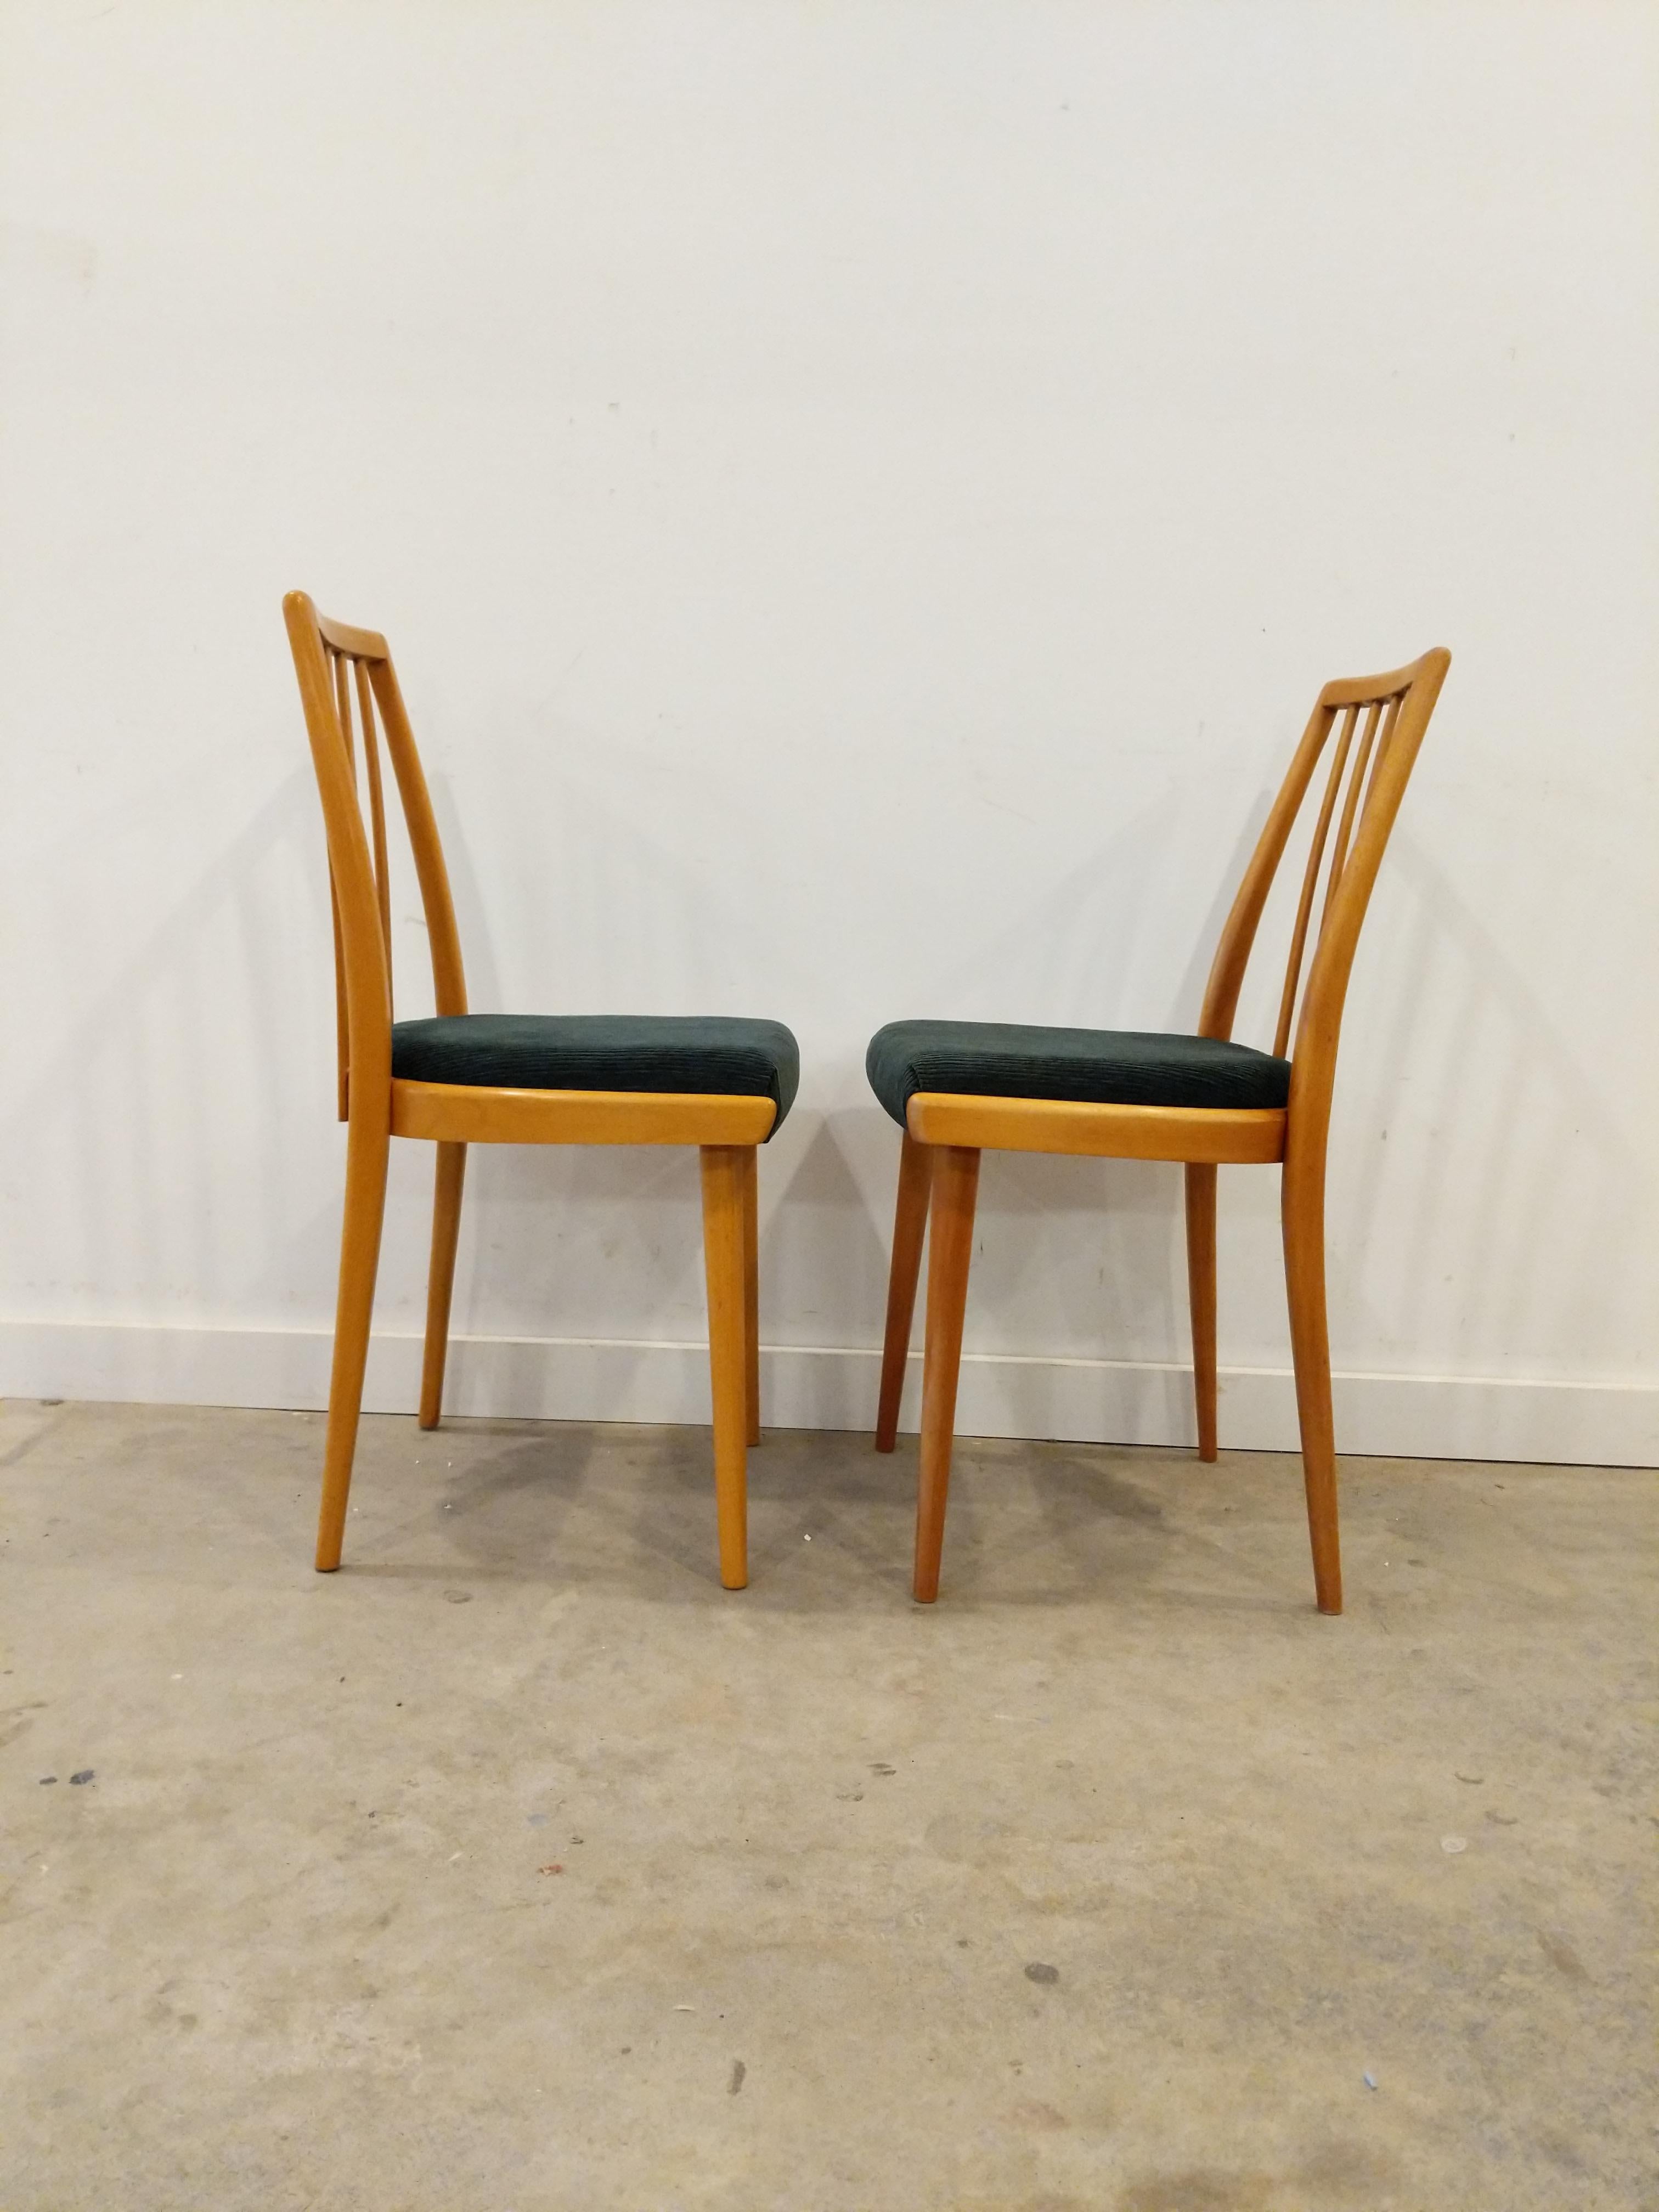 Pair of authentic vintage Czech mid century modern dining chairs.

Made by TON for Interier Praha. Maker's label on bottom.

This set is in excellent condition with brand new Knoll corduroy upholstery!

Knoll Cozy Cord corduroy fabric in Jewel (dark